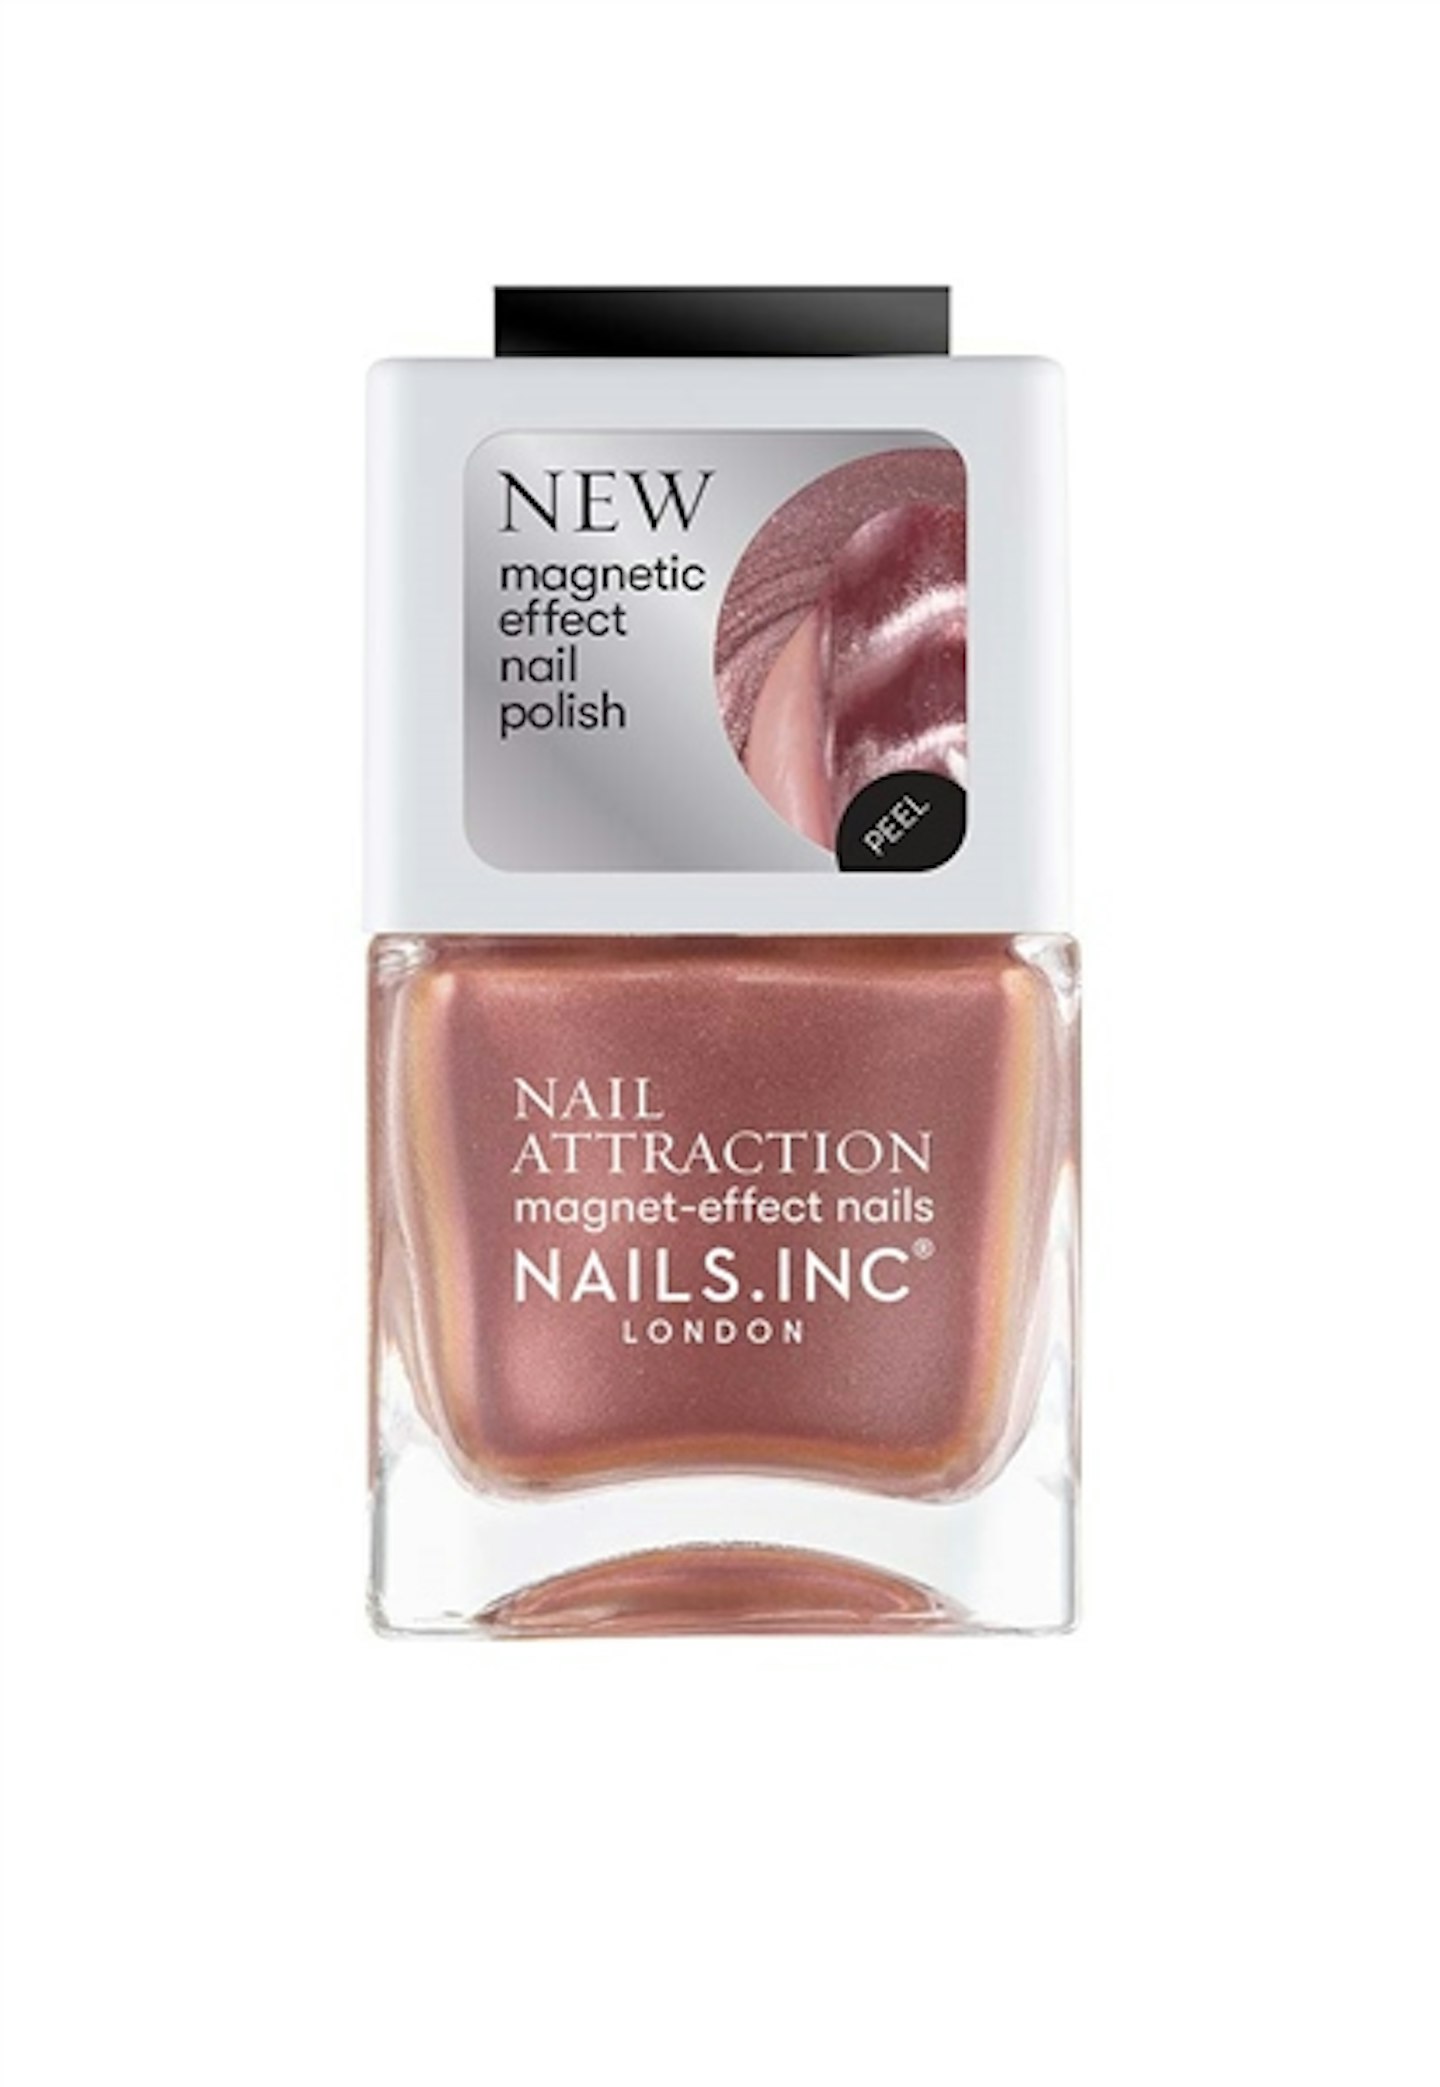 Nails.Inc Laws Of Attraction Magnetic Polish